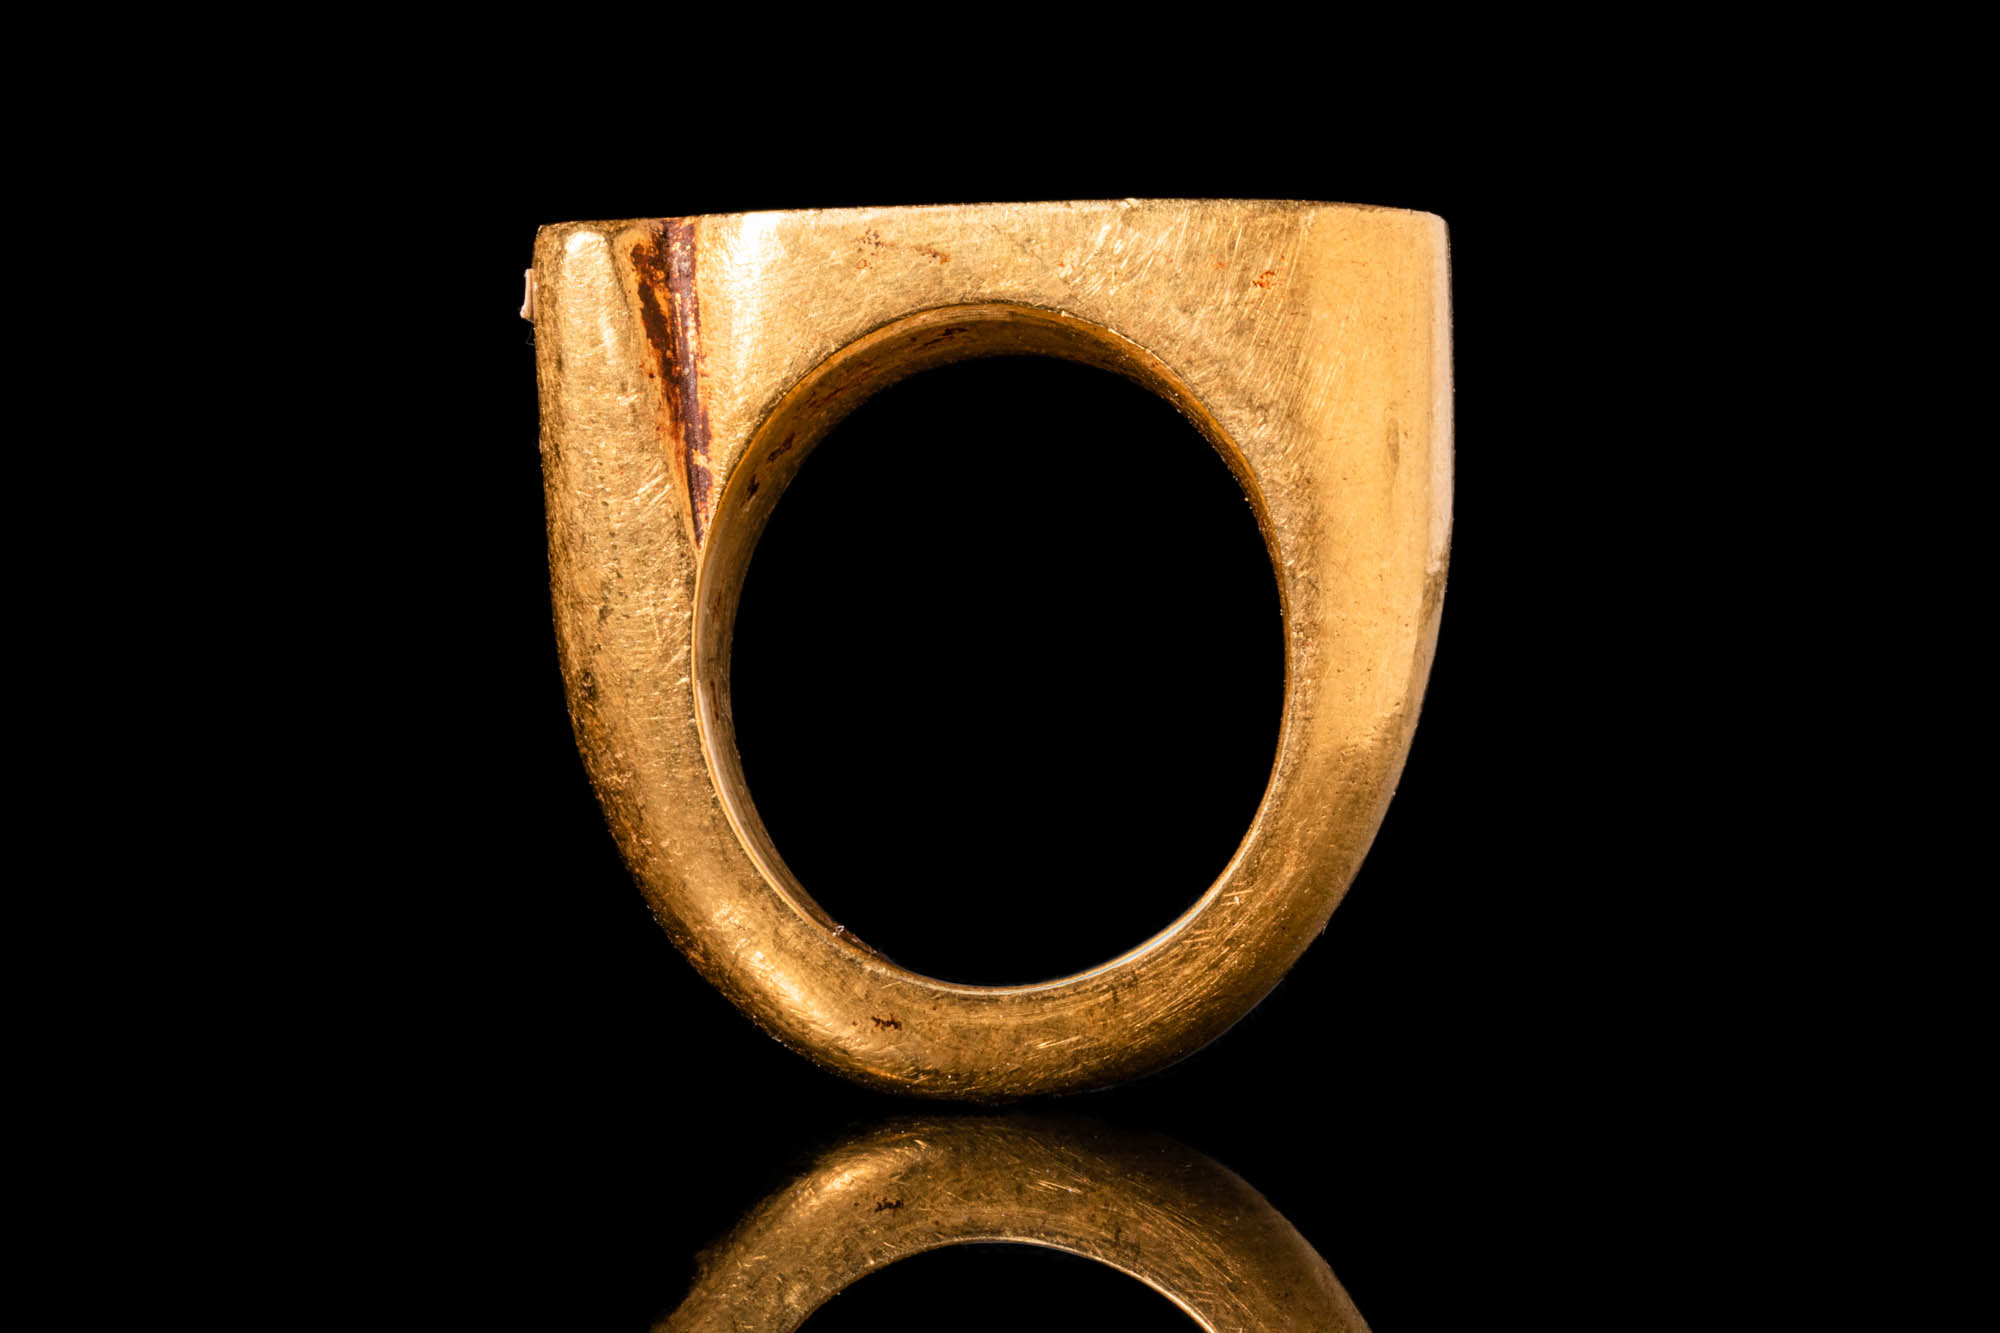 HEAVY EGYPTIAN CARTOUCHE GOLD RING - 82 GRAMS - Image 6 of 6